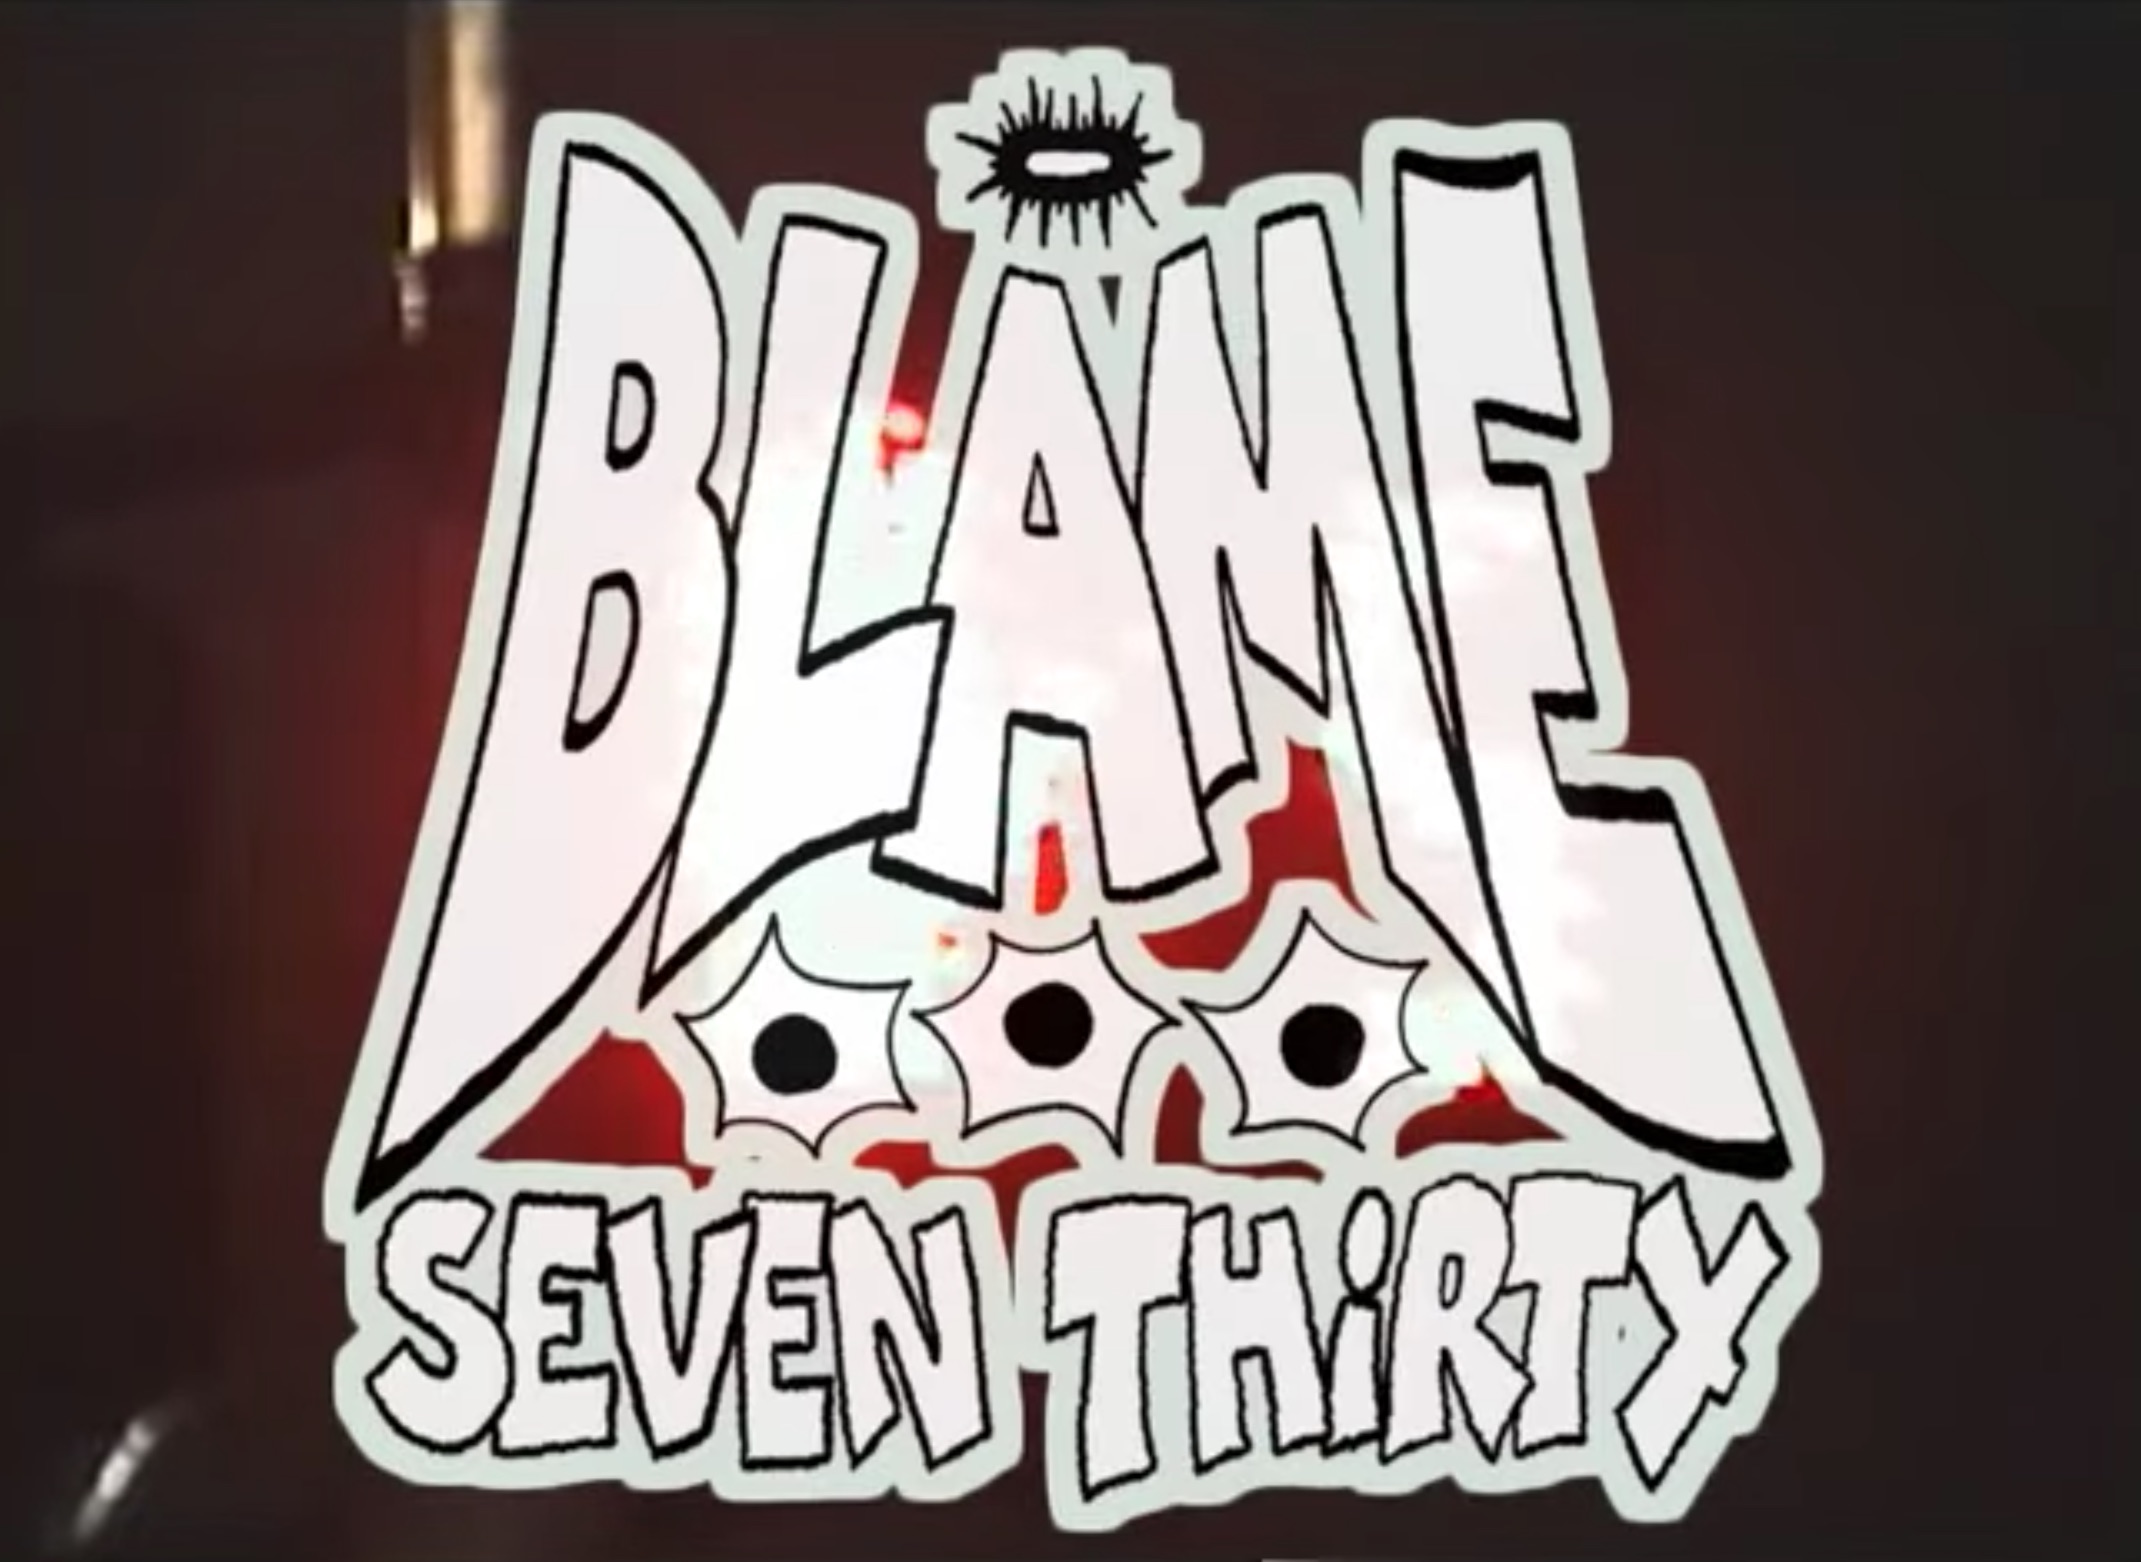 Blame 730 - The Blame Video cover